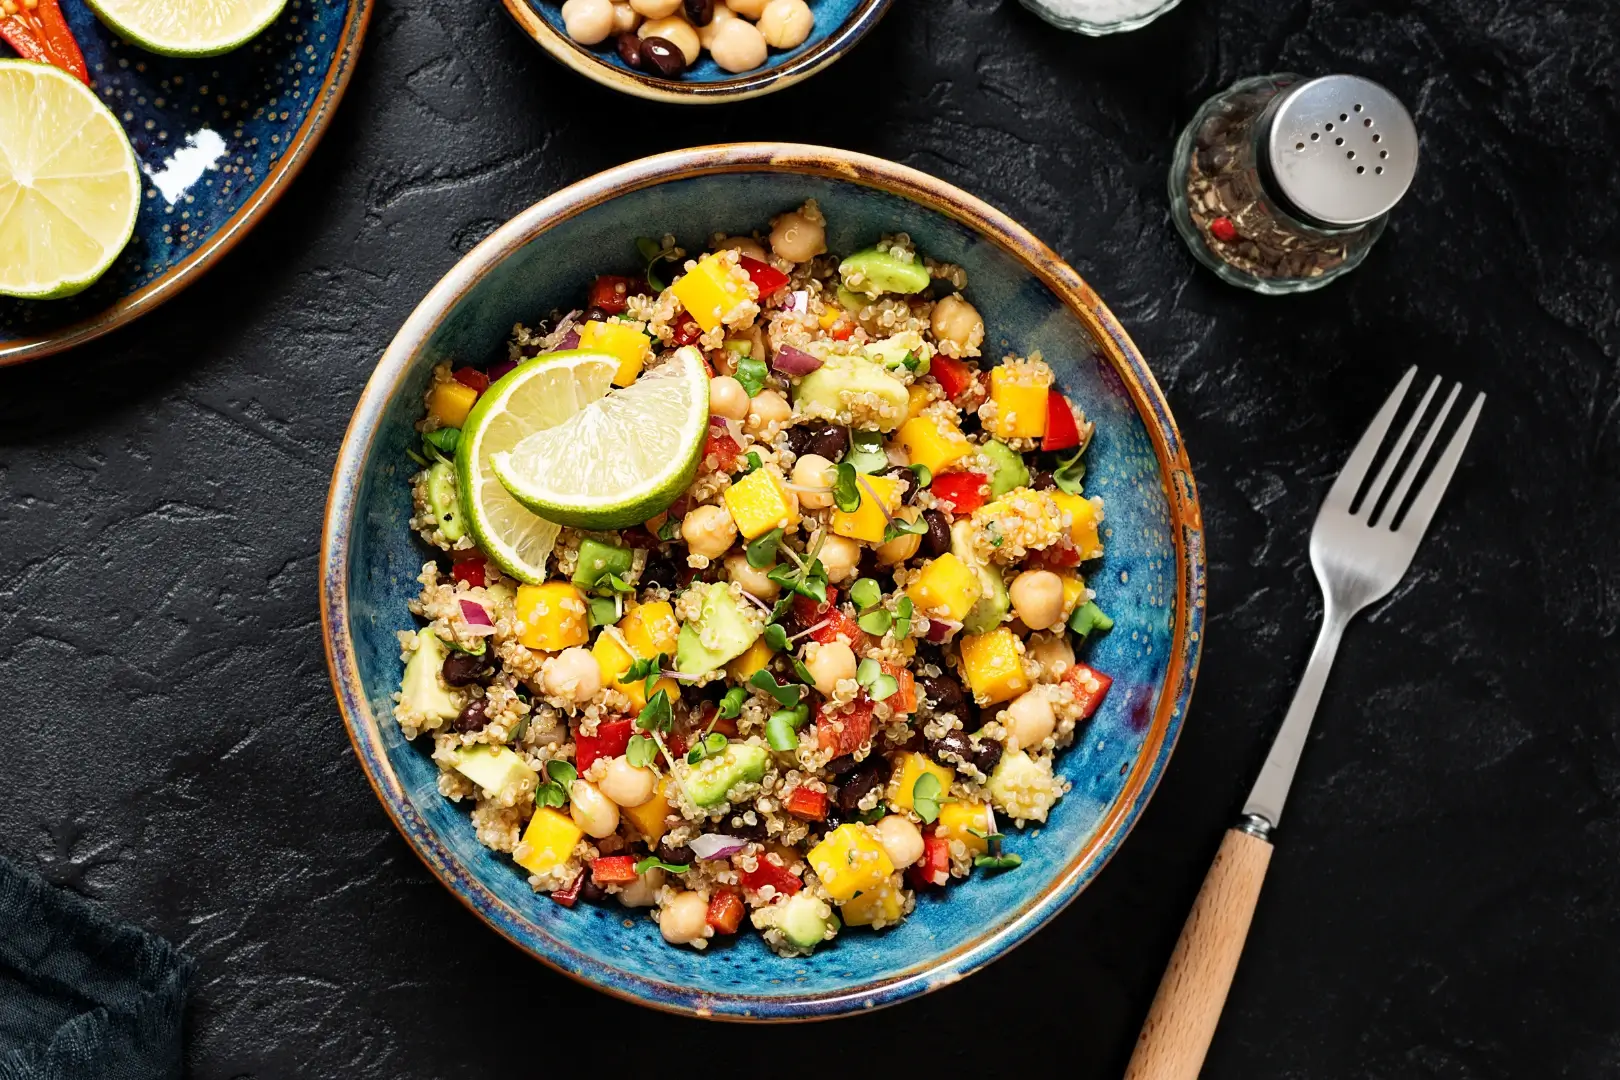 Recette salade mexicaine traditionnelle